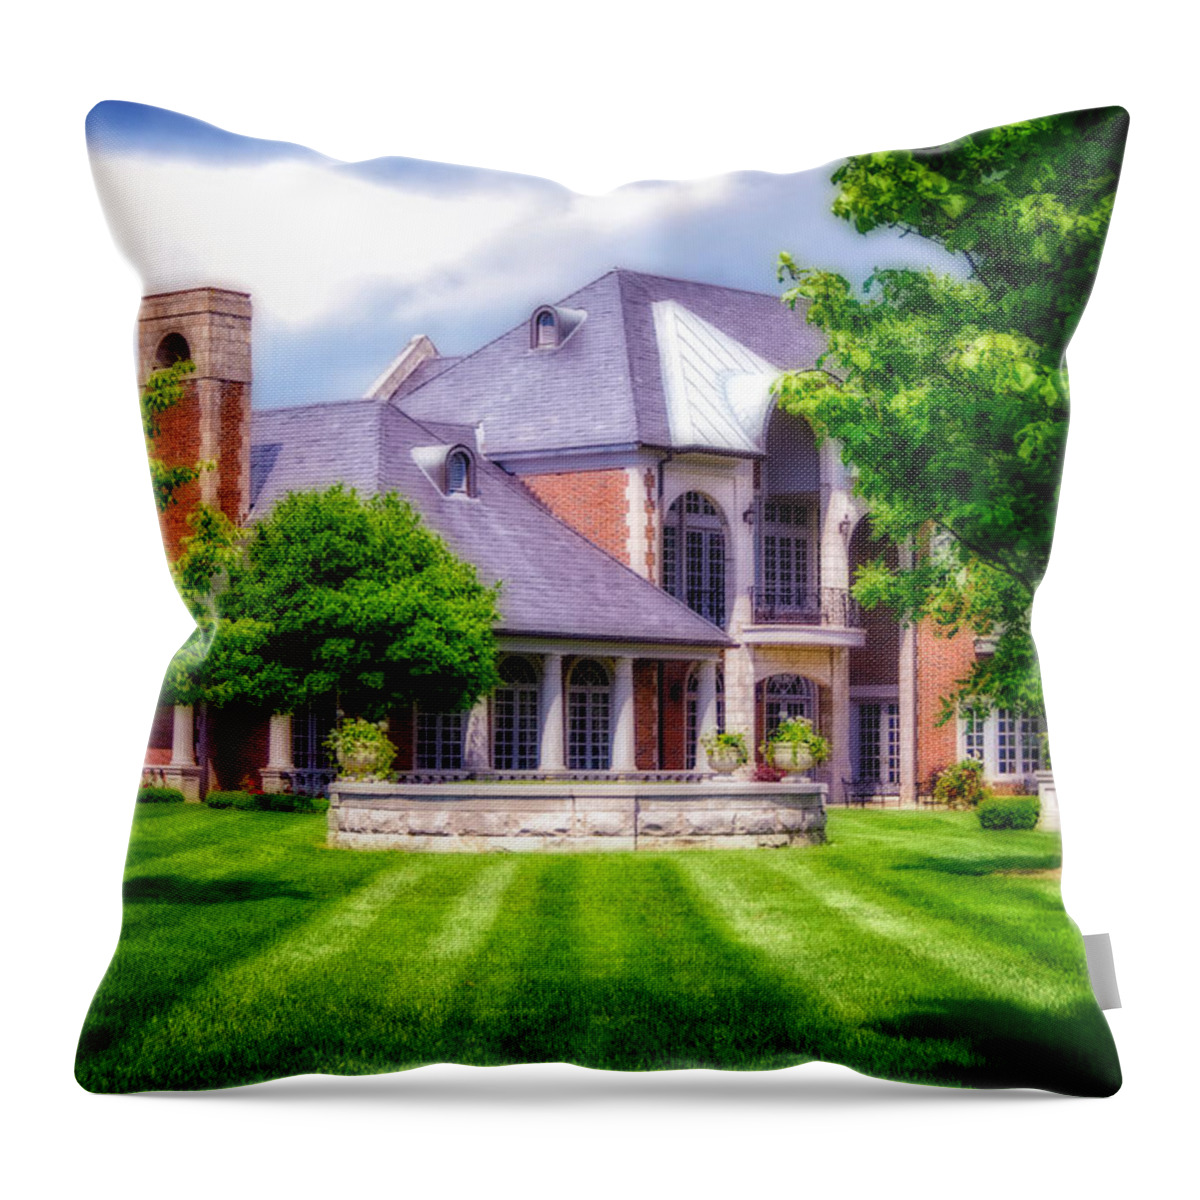 Donamire Horse Farm. Mansion. Home. House. Brick Home. Architecture. Trees. Landscape. Lawn. Grass. Fence. Stone Fence. Flowers. Shrubs. Cloudy Skies. Fireplace. Photography. Digital Art. Print. Canvas. Nature. Wildlife. Throw Pillow featuring the photograph Donamire Farms by Mary Timman